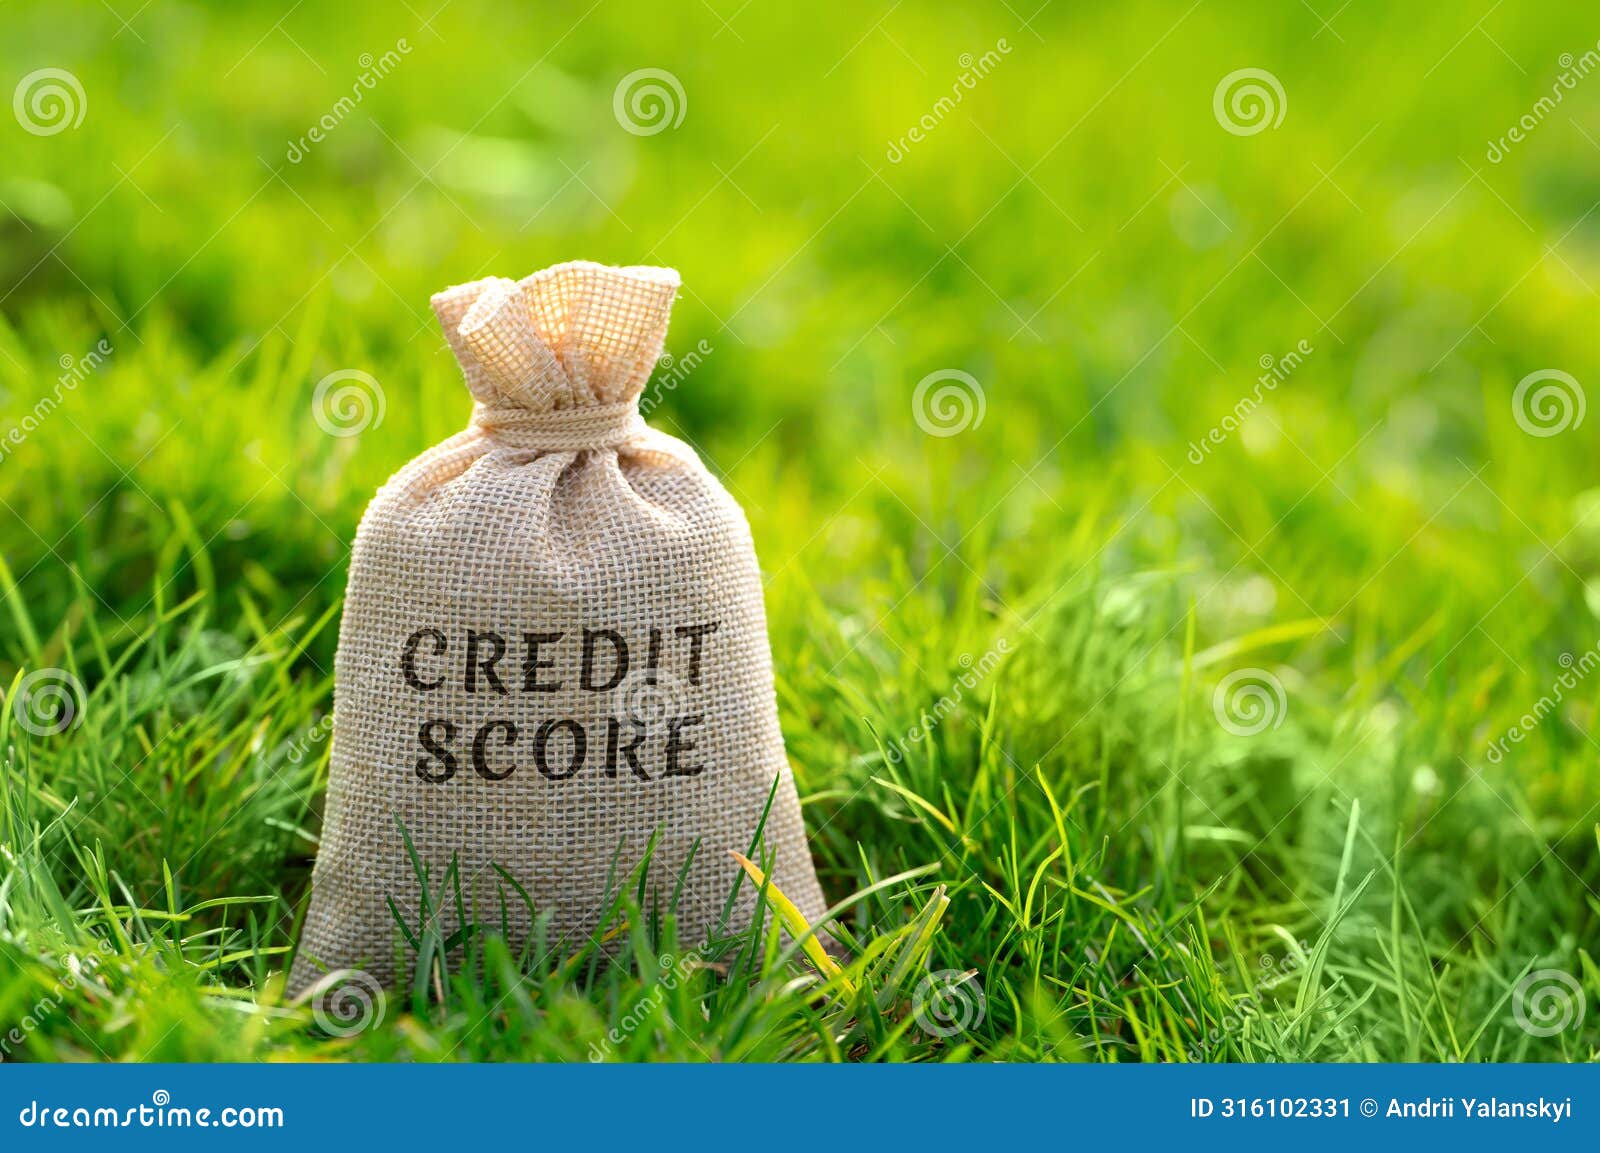 credit score concept. numerical representation of an individual's creditworthiness